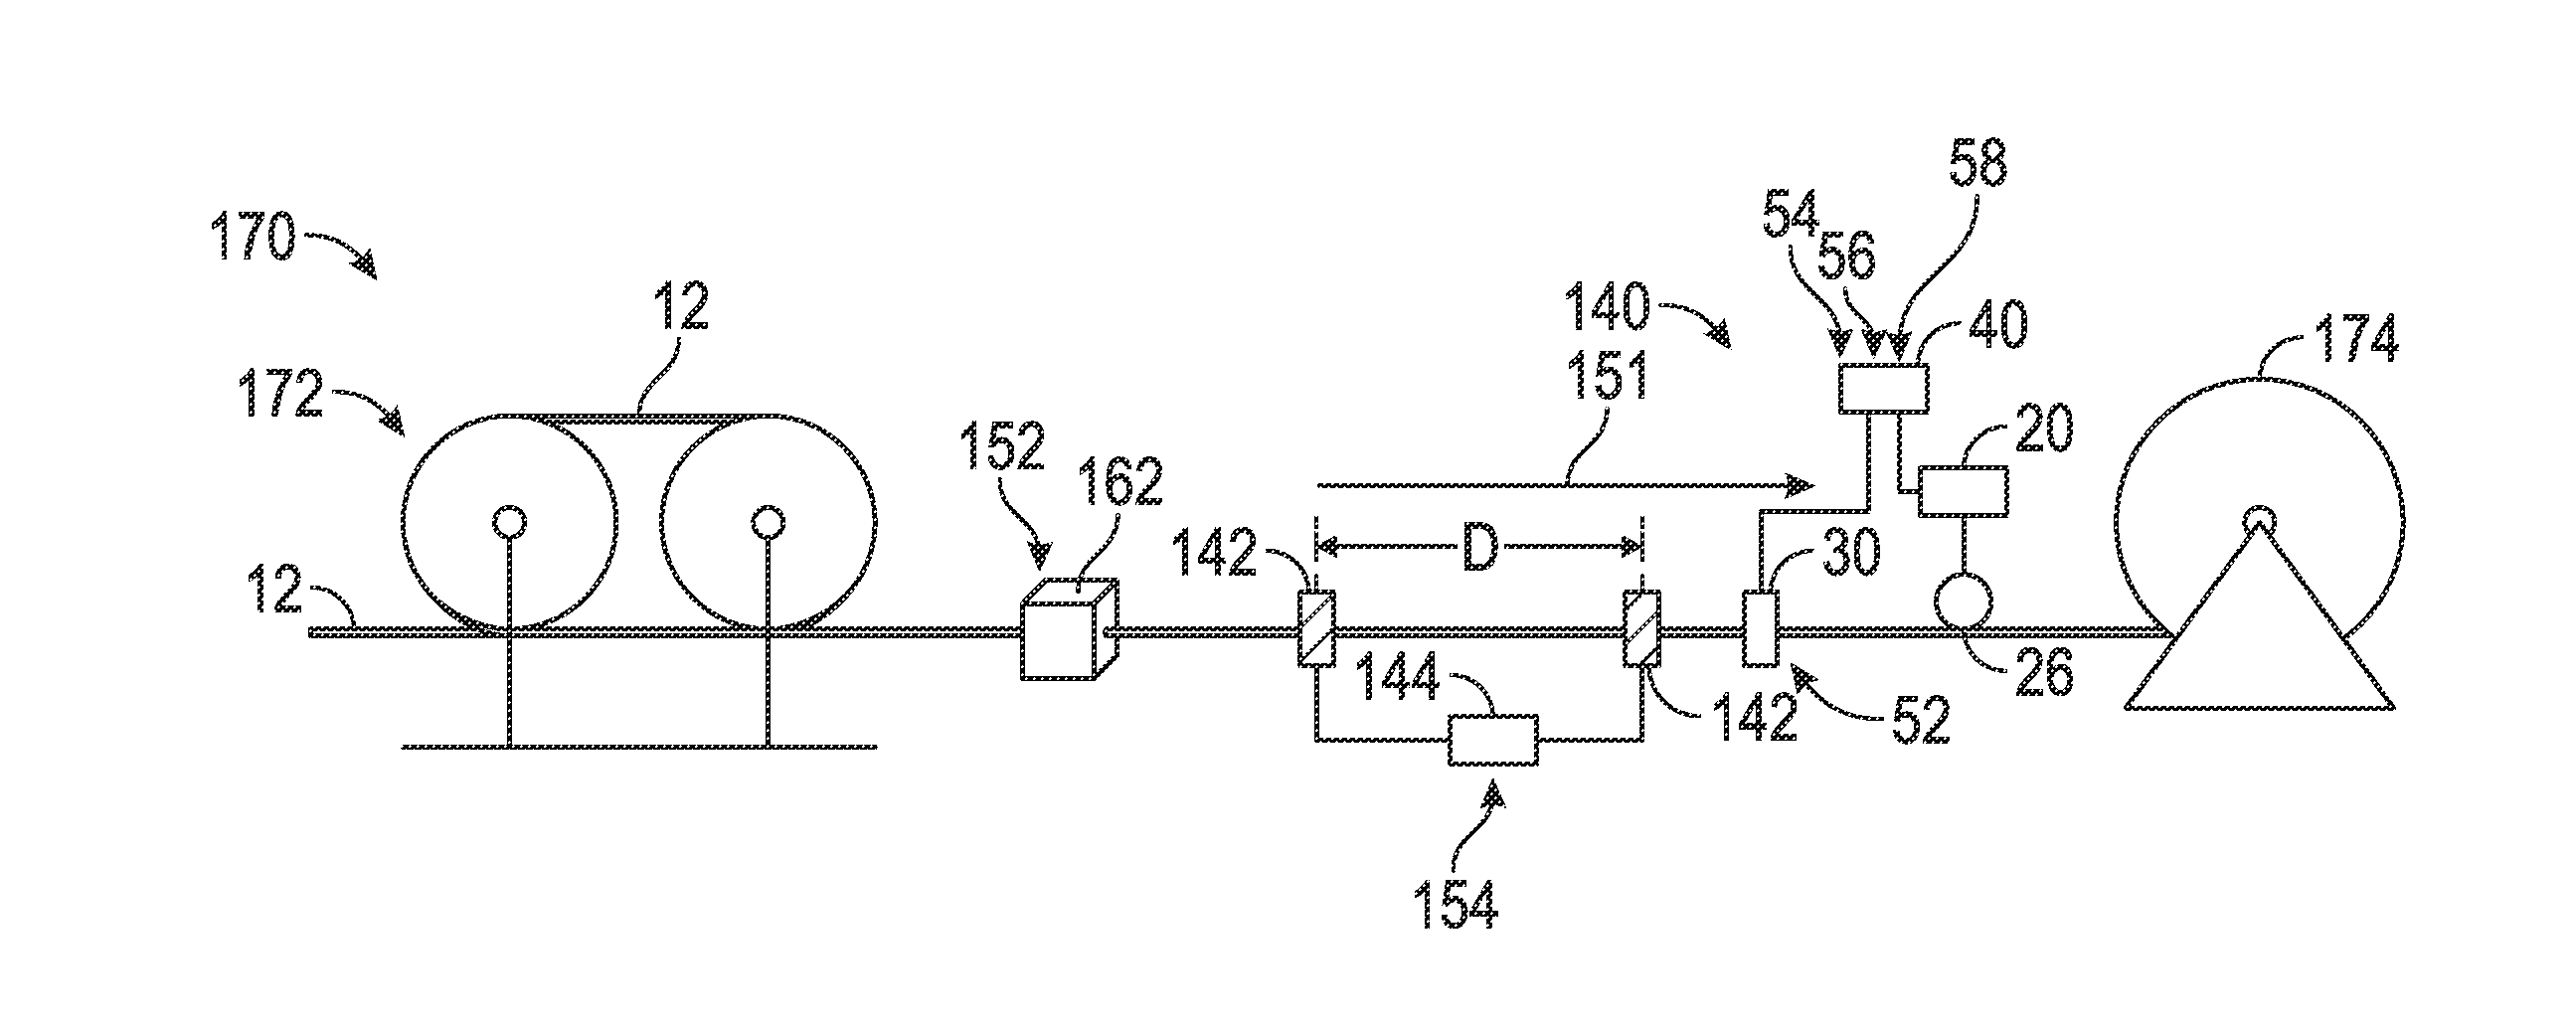 Method and apparatus for wire rope distance measurement